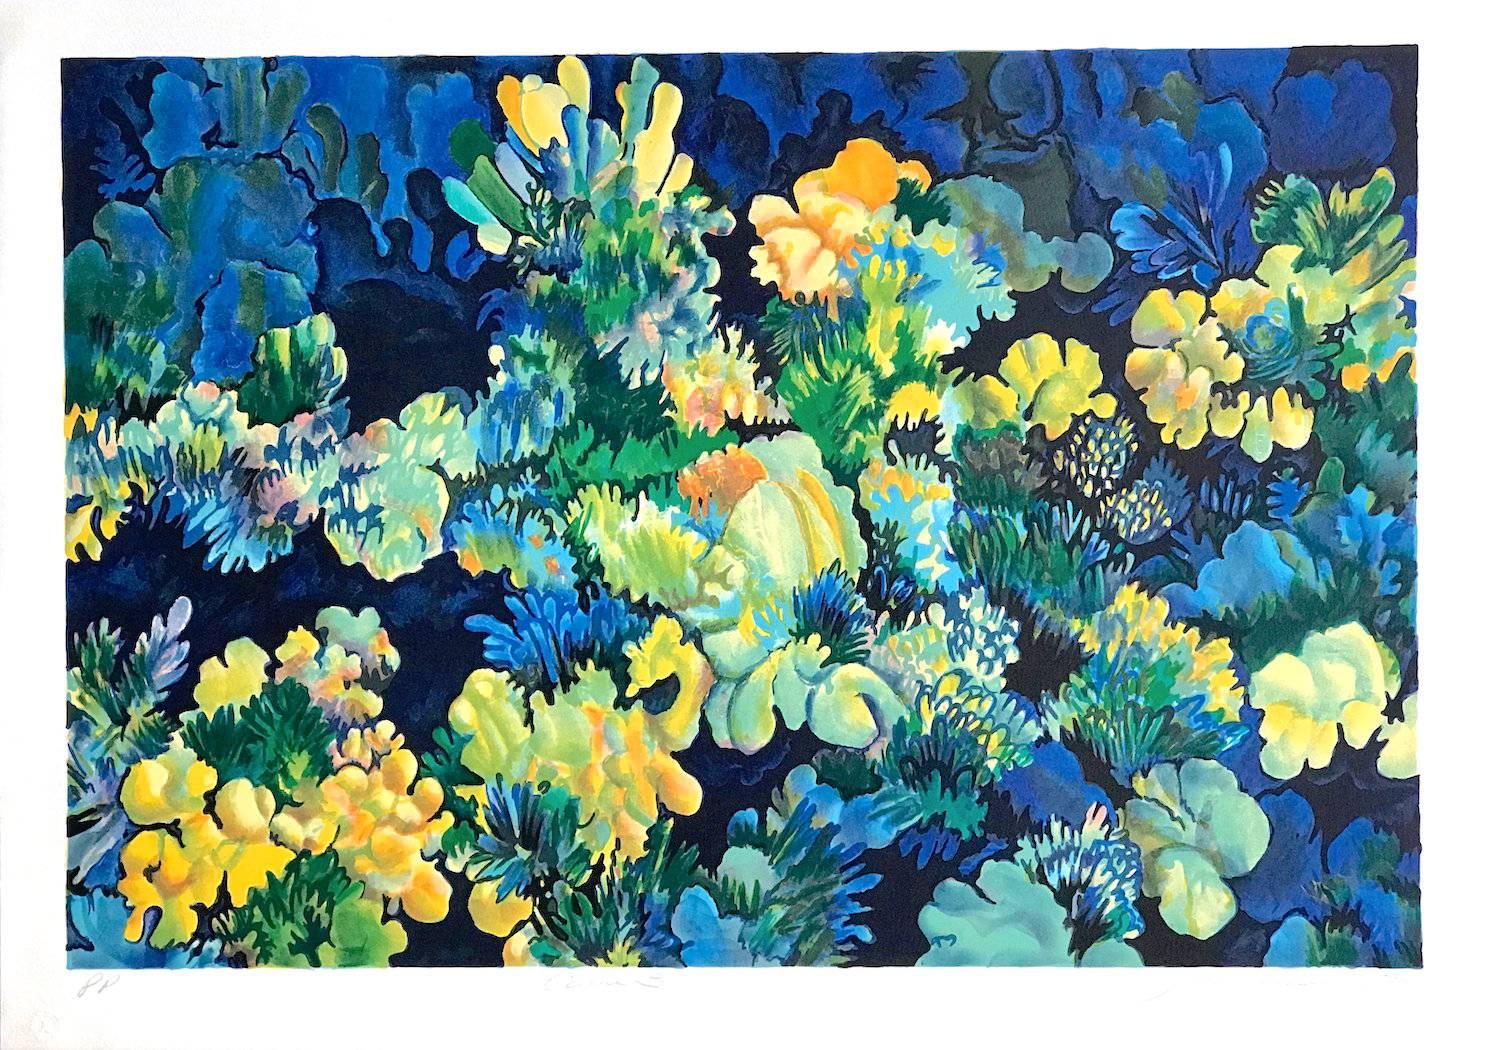 Coral 3 - Blue, Original Lithograph, Nature Abstract, Coral Reef - Print by Joan Melnick